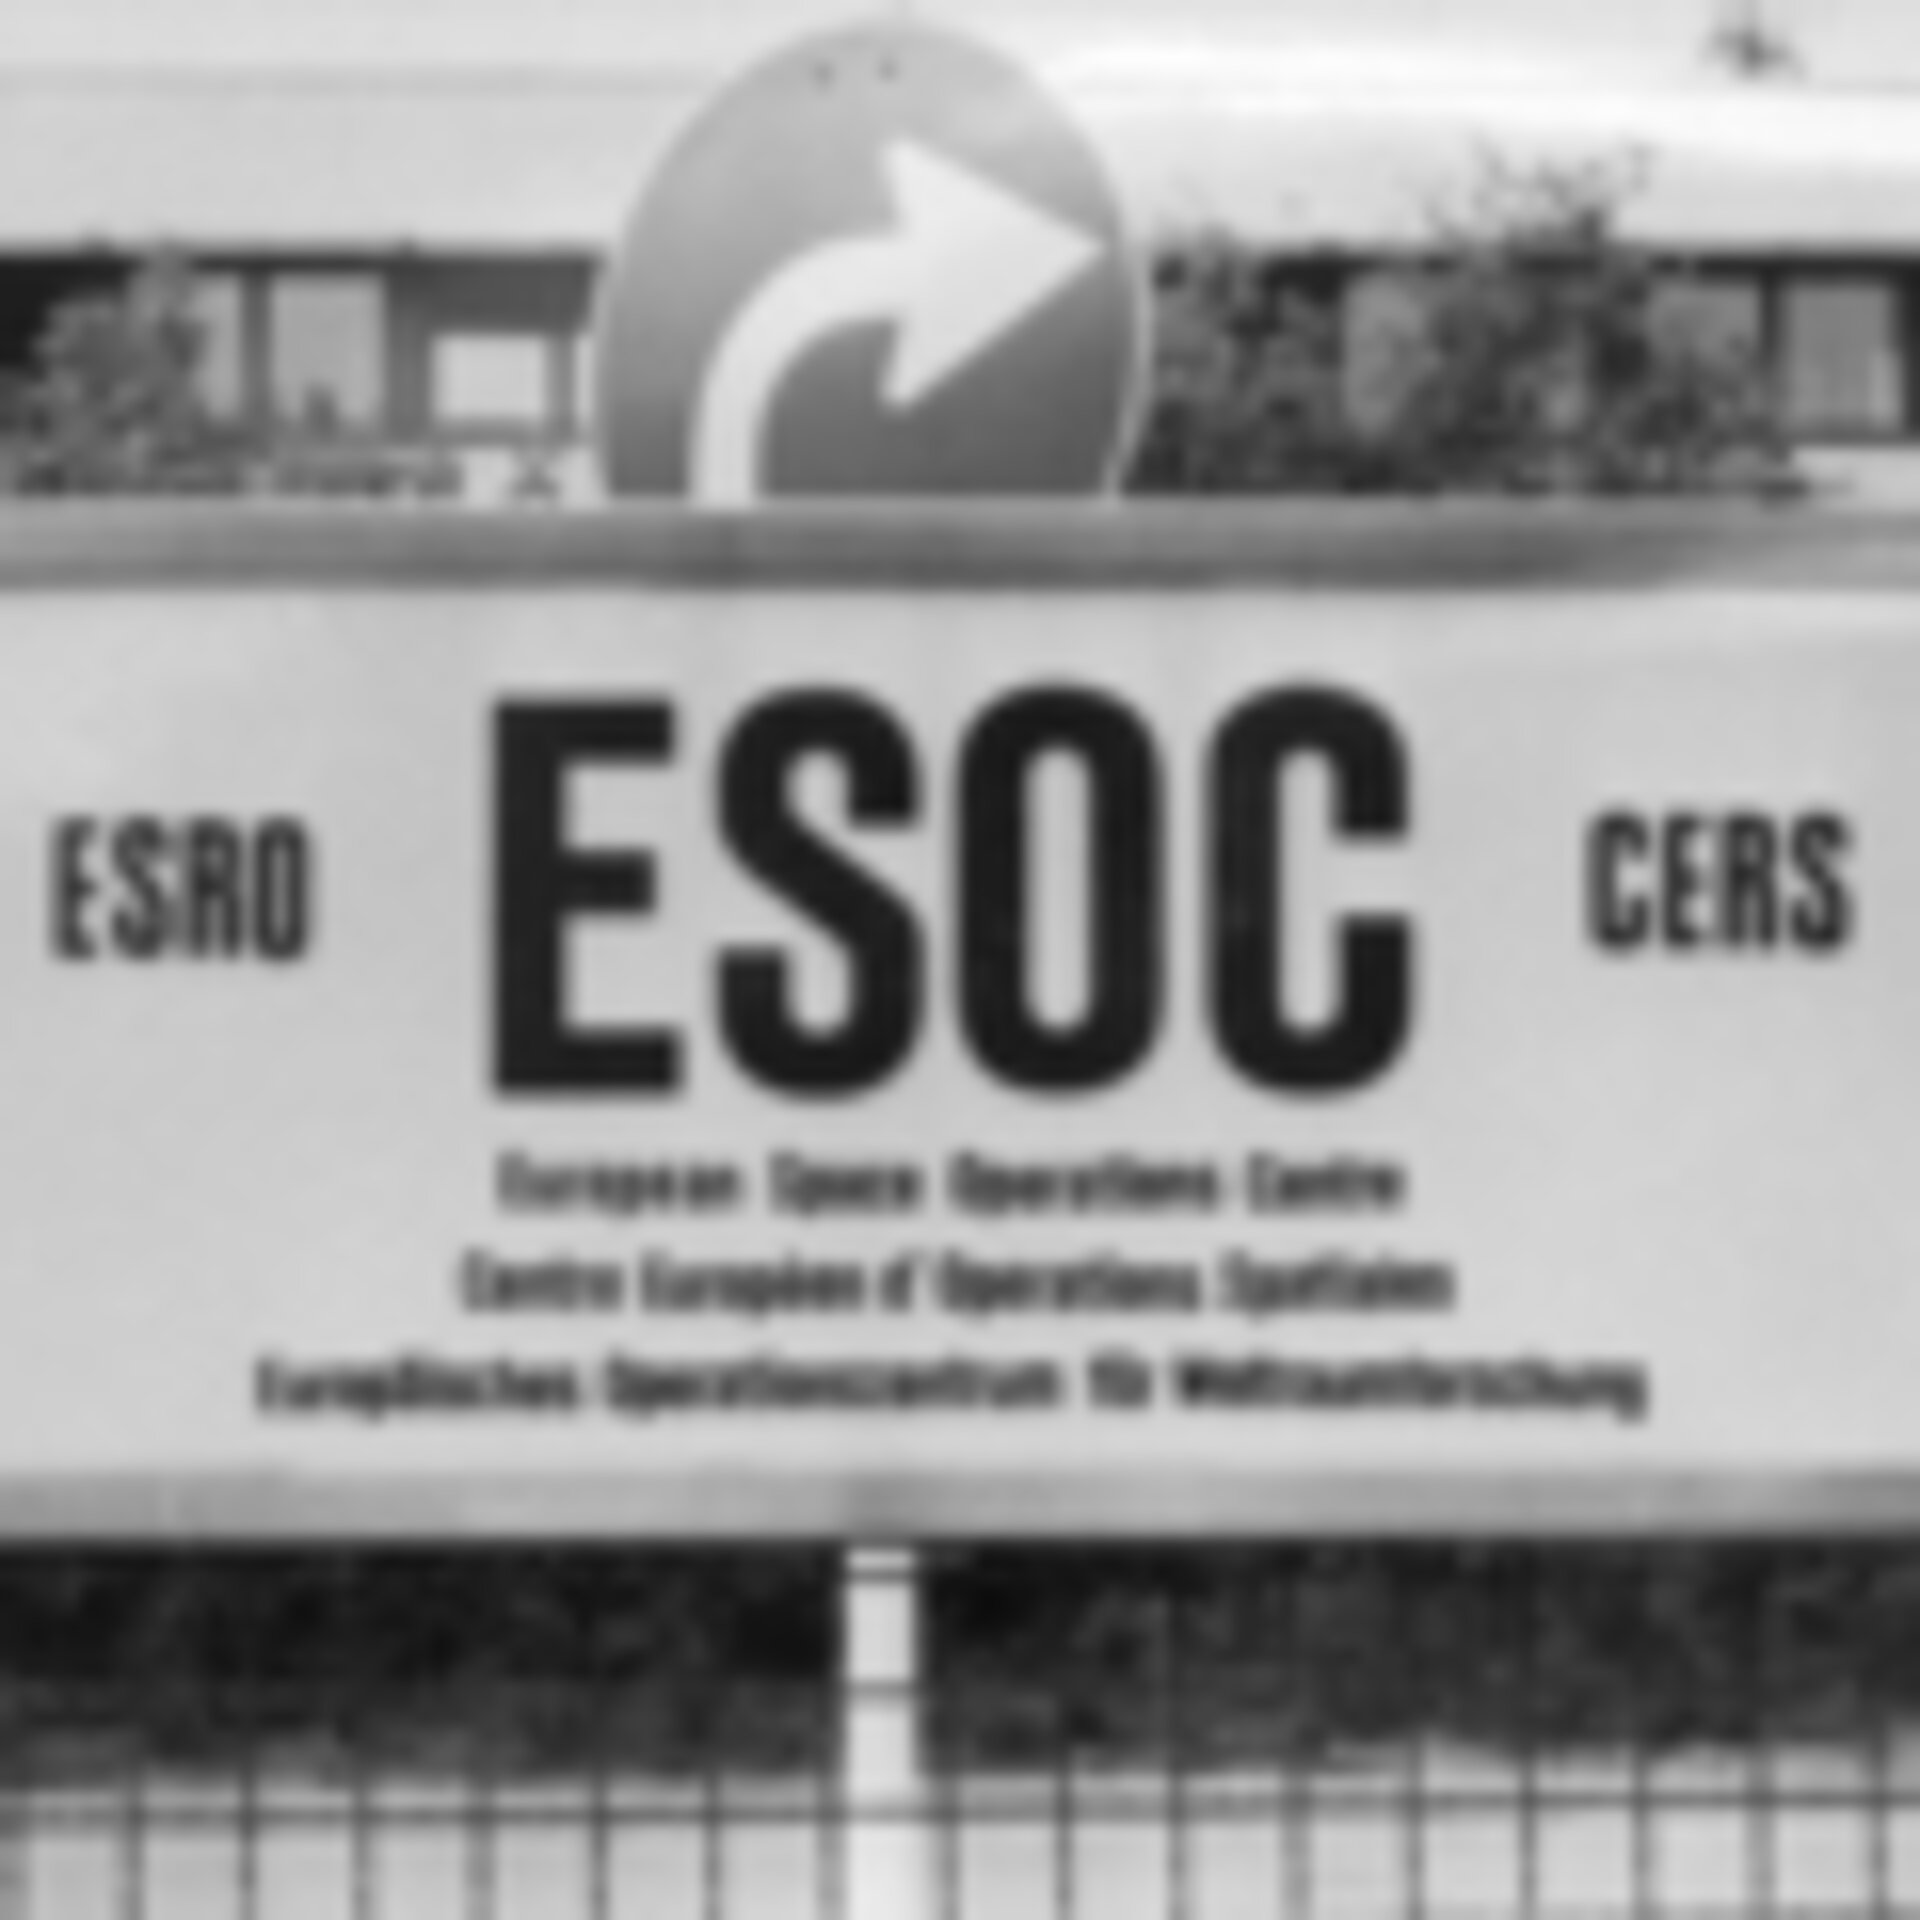 ESOC 1967, recently renamed from ESDAC (European Space Data Centre)